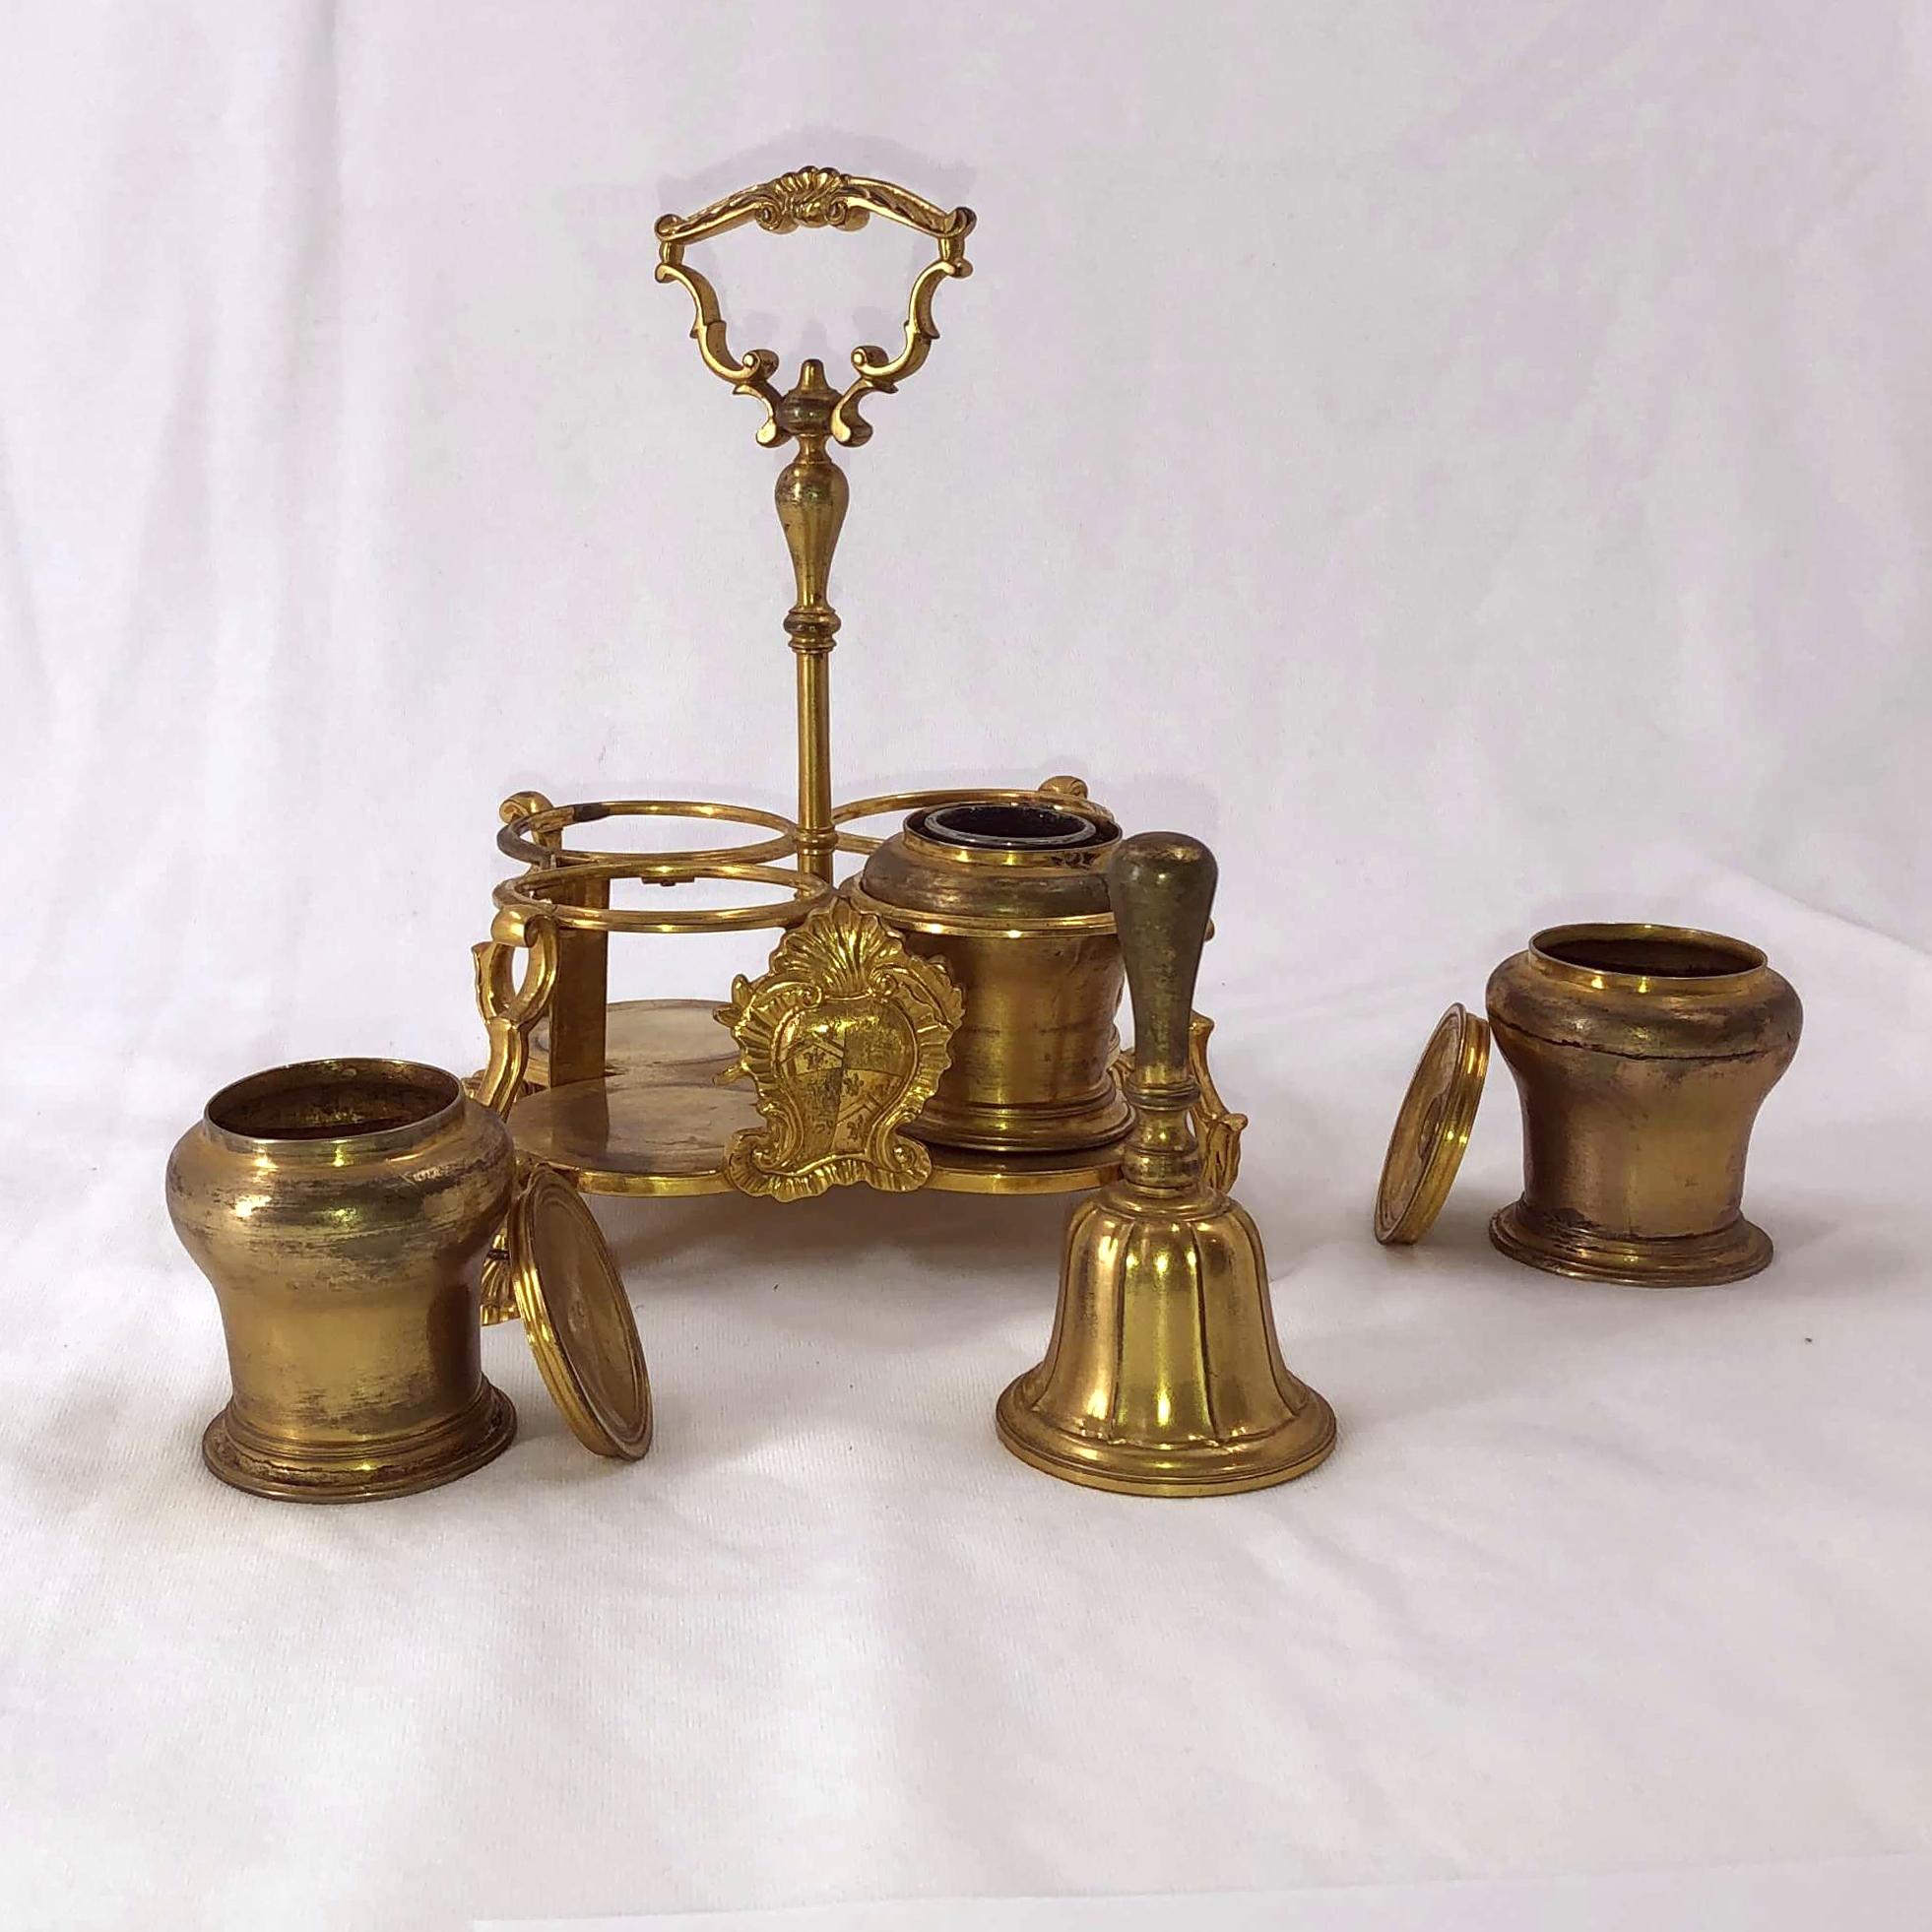 An early 19th century English gilt bronze desk set Standish with handle, cartouche mount, and unusual shell form feet.